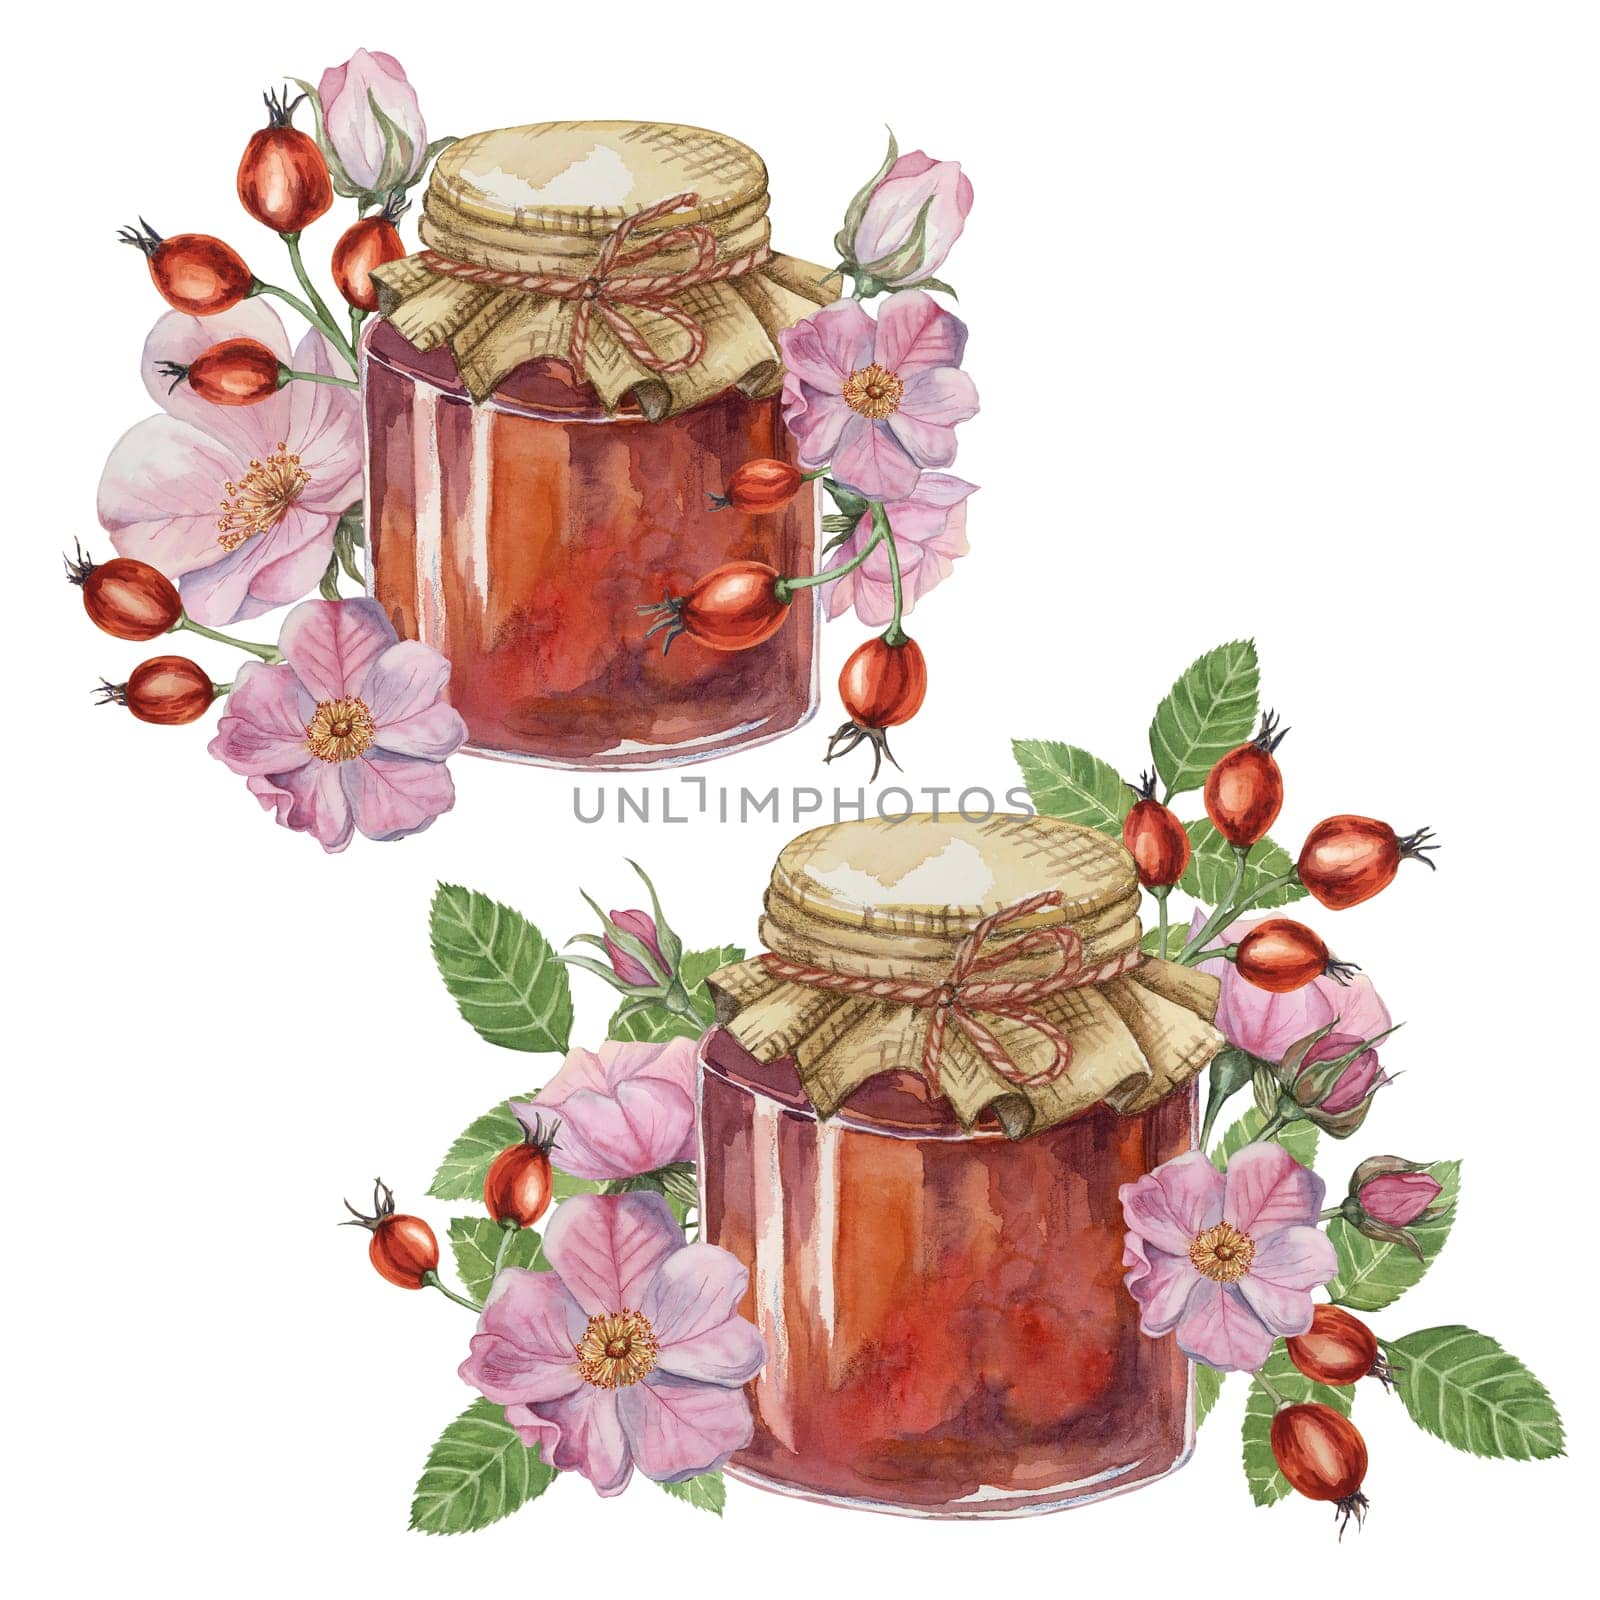 Set of home made rose hip jam in glass jar with fabric lid rope bow. Pancake, donut filling traditional Austrian German Swiss fruit preserve watercolor illustration for printing, labels, packaging